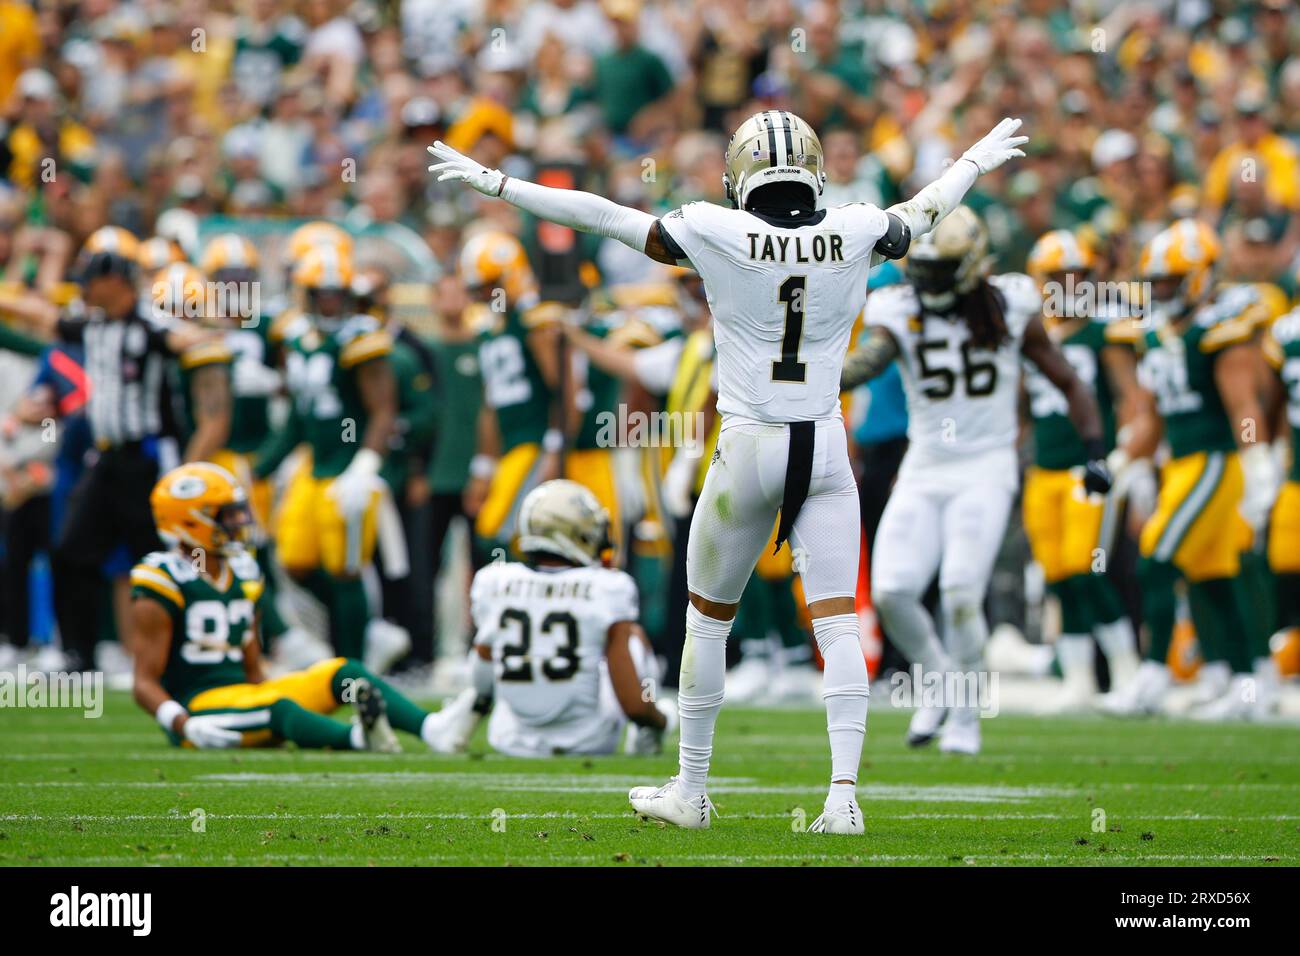 Green Bay, Wisconsin, USA. 24th Sep, 2023. New Orleans Saints cornerback Alontae Taylor (1) celebrates the pass breakup by cornerback Marshon Lattimore (23) on Green Bay Packers wide receiver Samori Toure (83) during the NFL football game between the New Orleans Saints and the Green Bay Packers at Lambeau Field in Green Bay, Wisconsin. Darren Lee/CSM/Alamy Live News Stock Photo